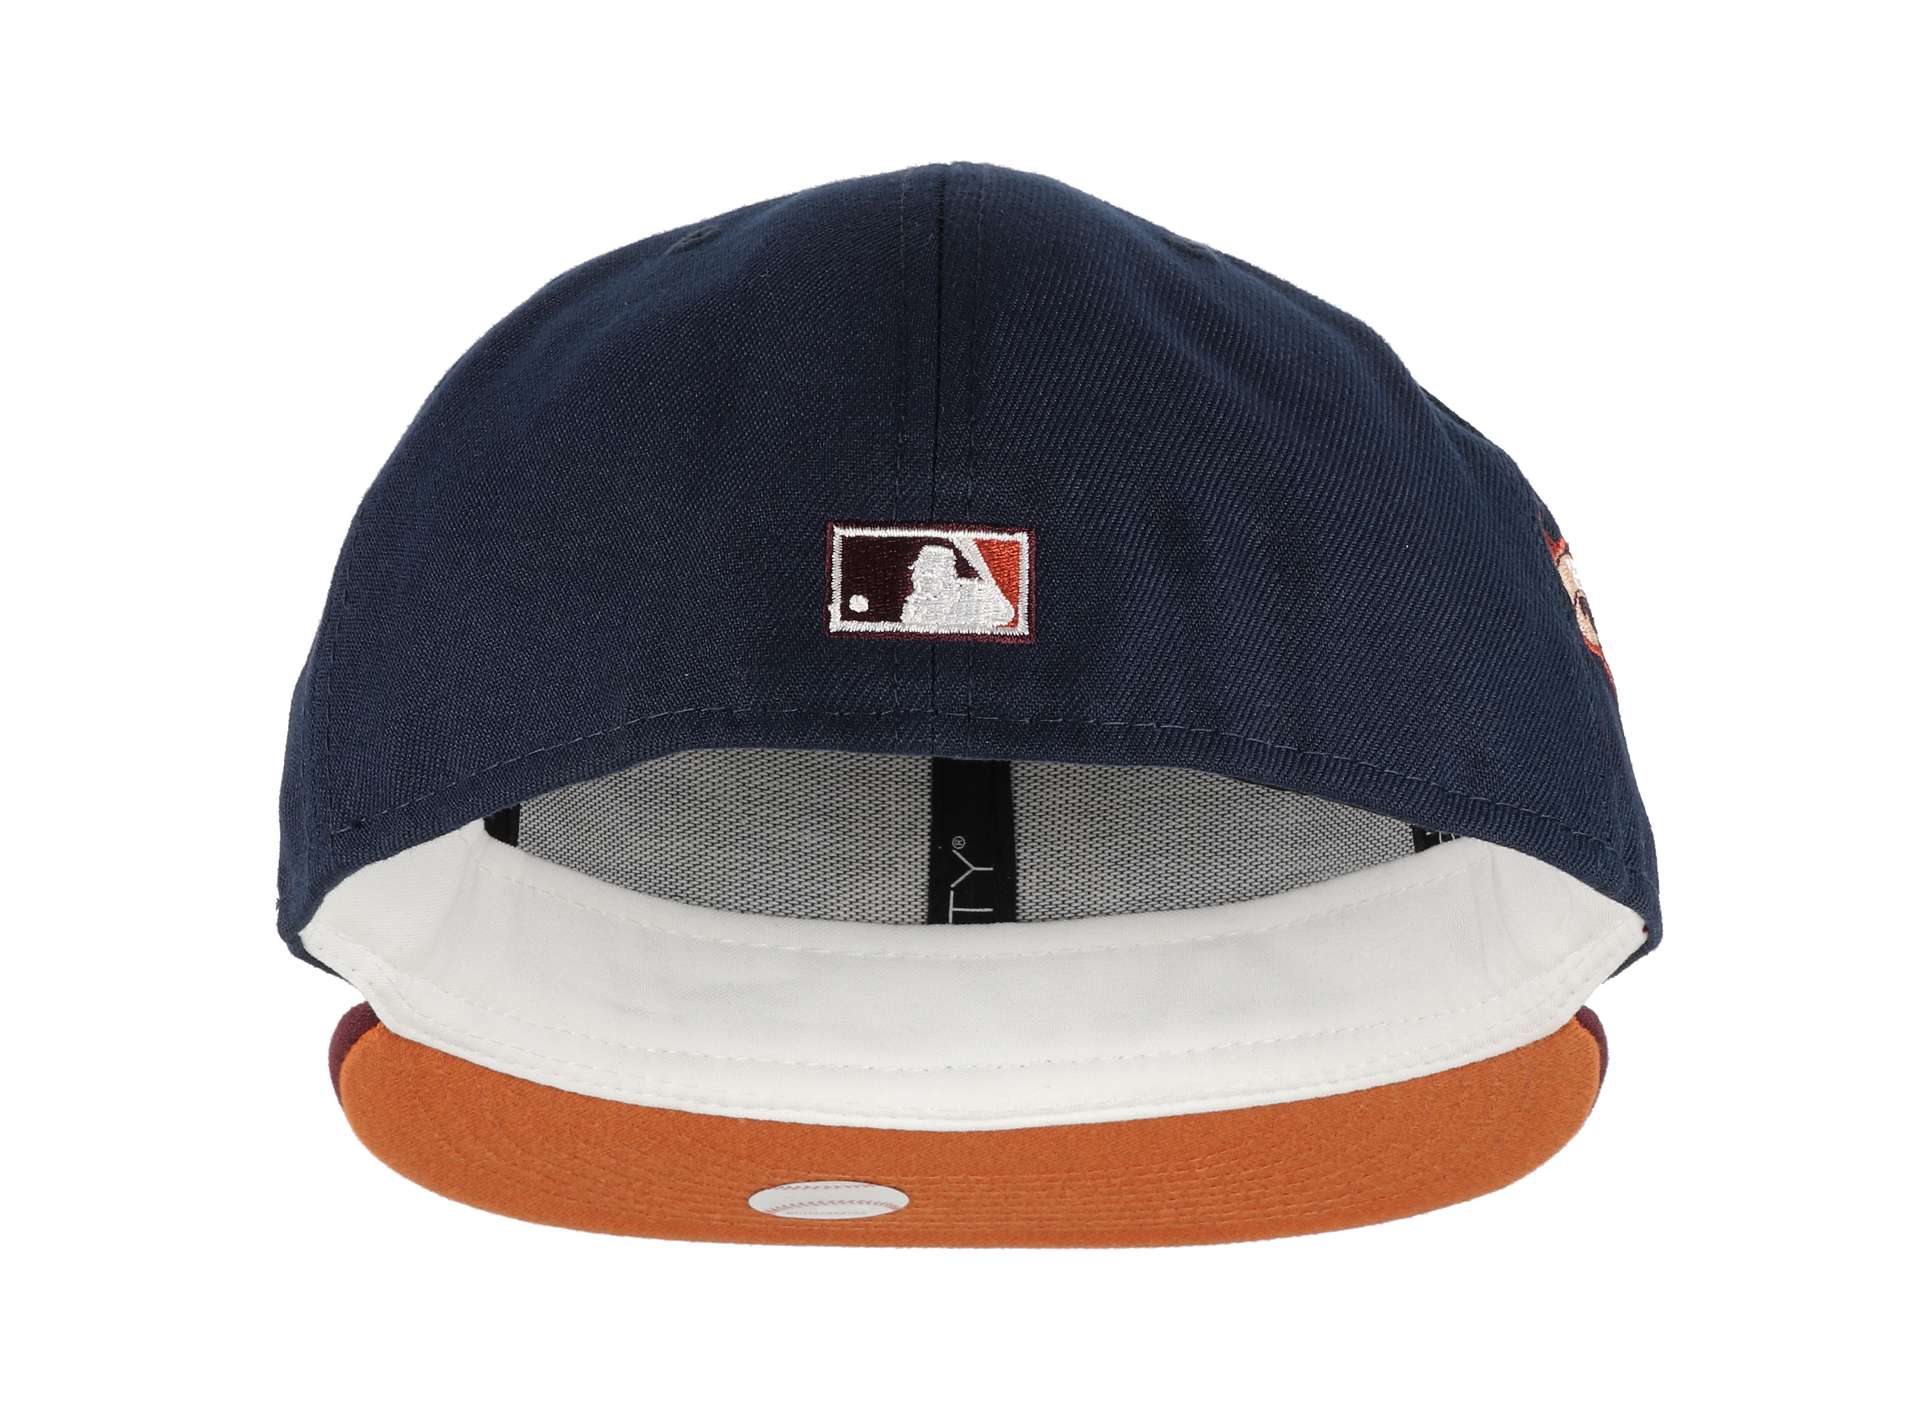 Detroit Tigers MLB Cooperstown Stadium Sidepatch Oceanside Maroon 59Fifty Basecap New Era